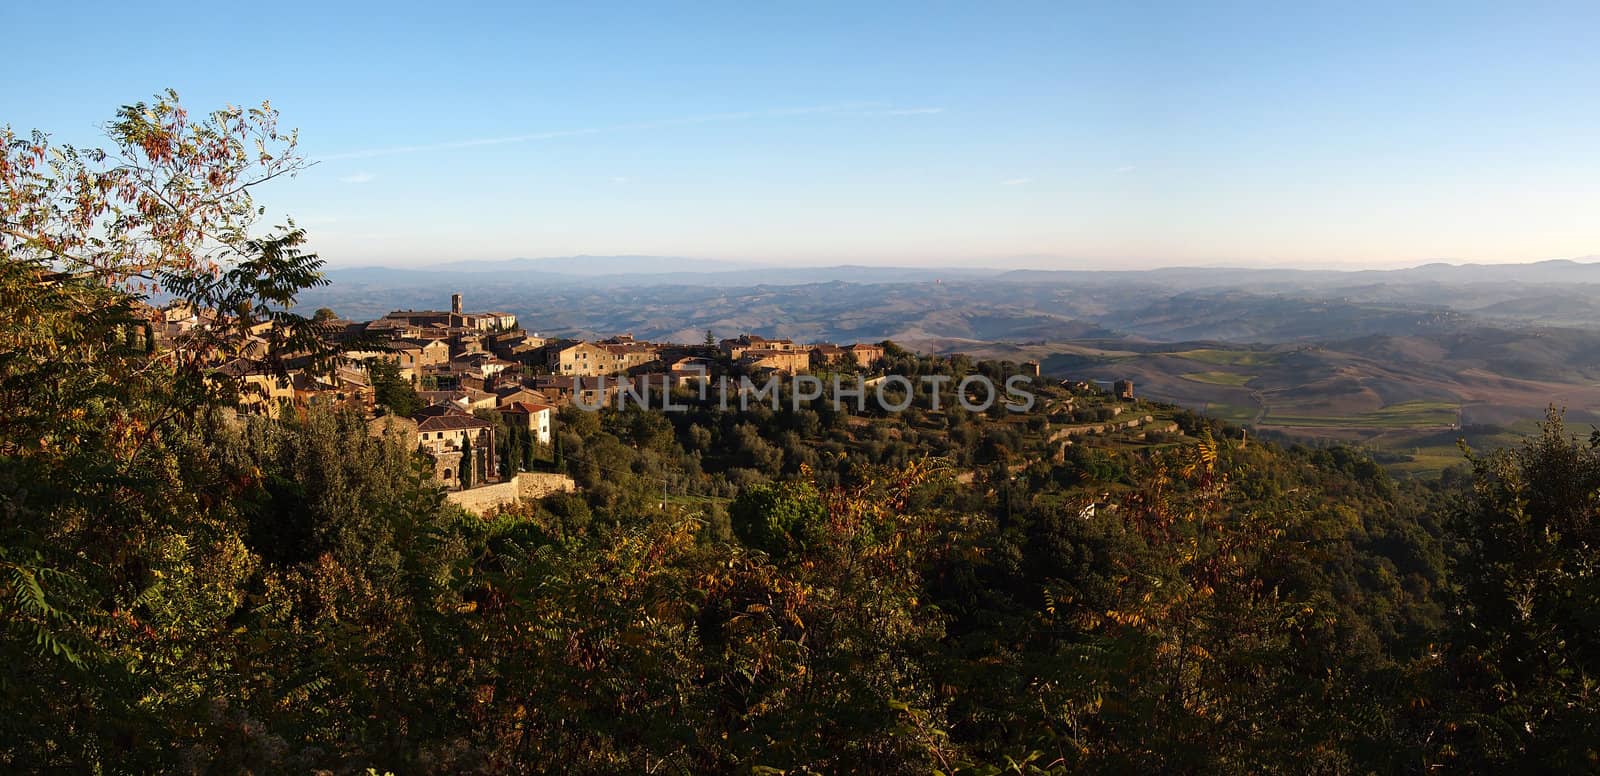 Italian hilltop town by pljvv